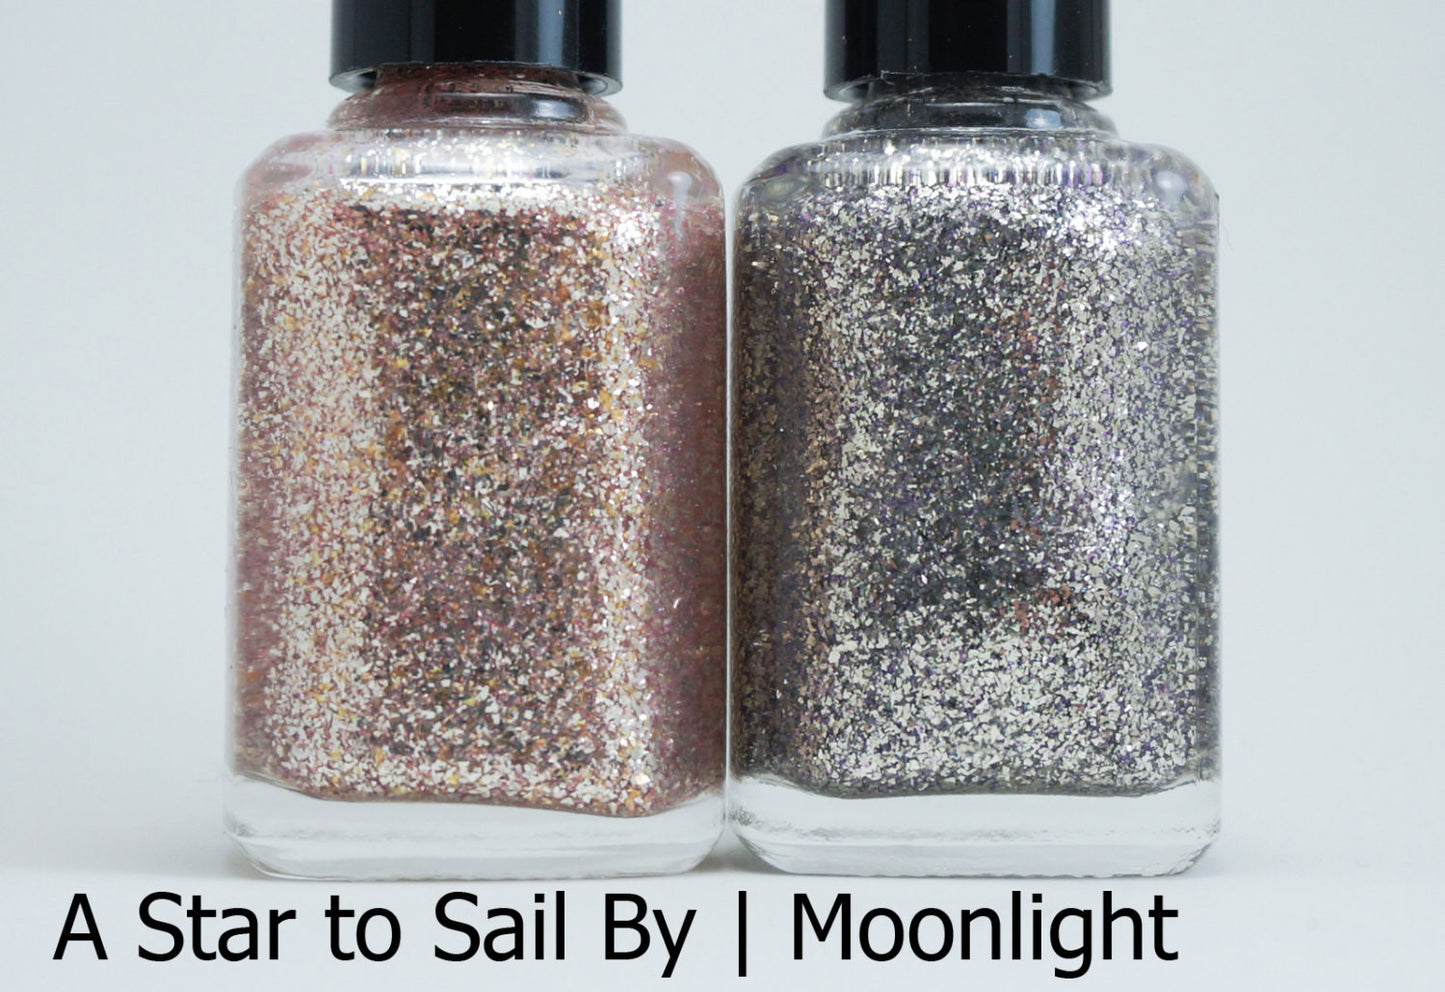 A Star to Sail By 2.0 - rose gold - real silver flakies - SUPER shiny!